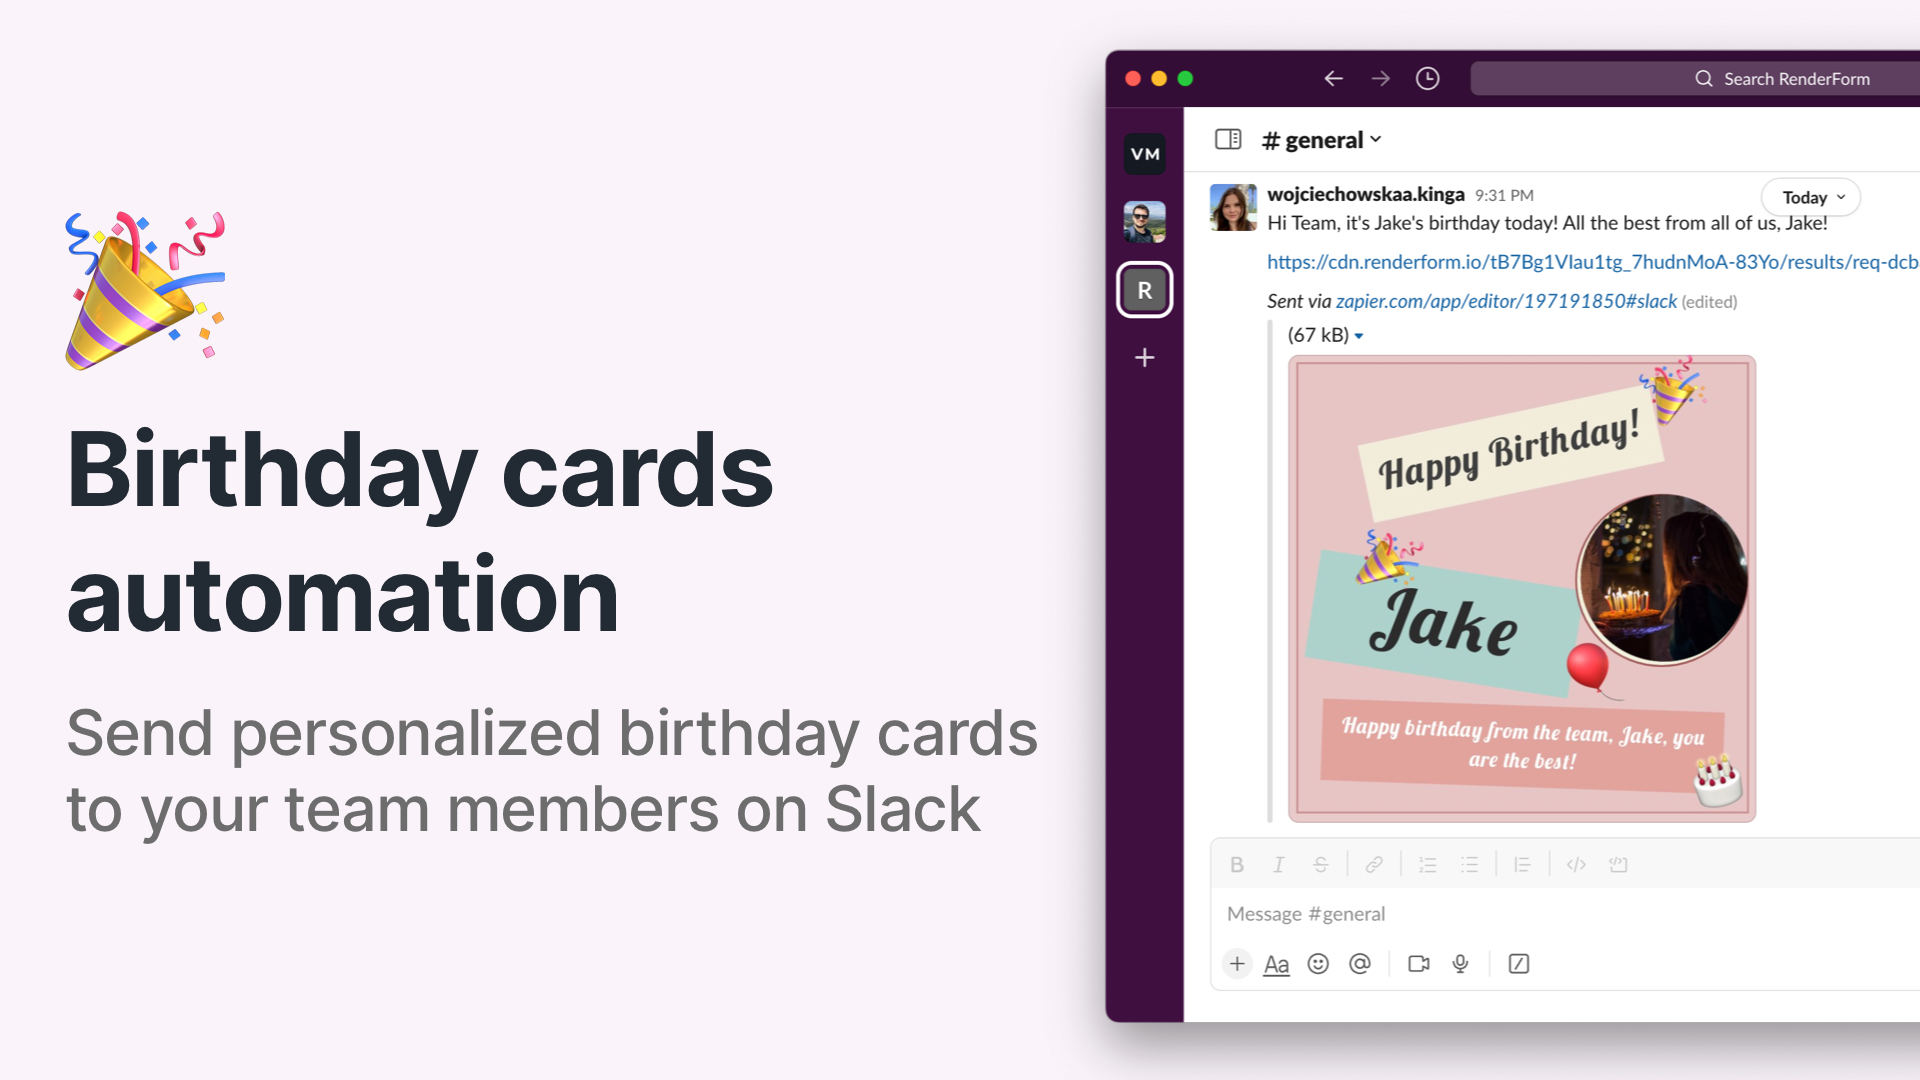 Automate sending birthday cards to your team members on Slack